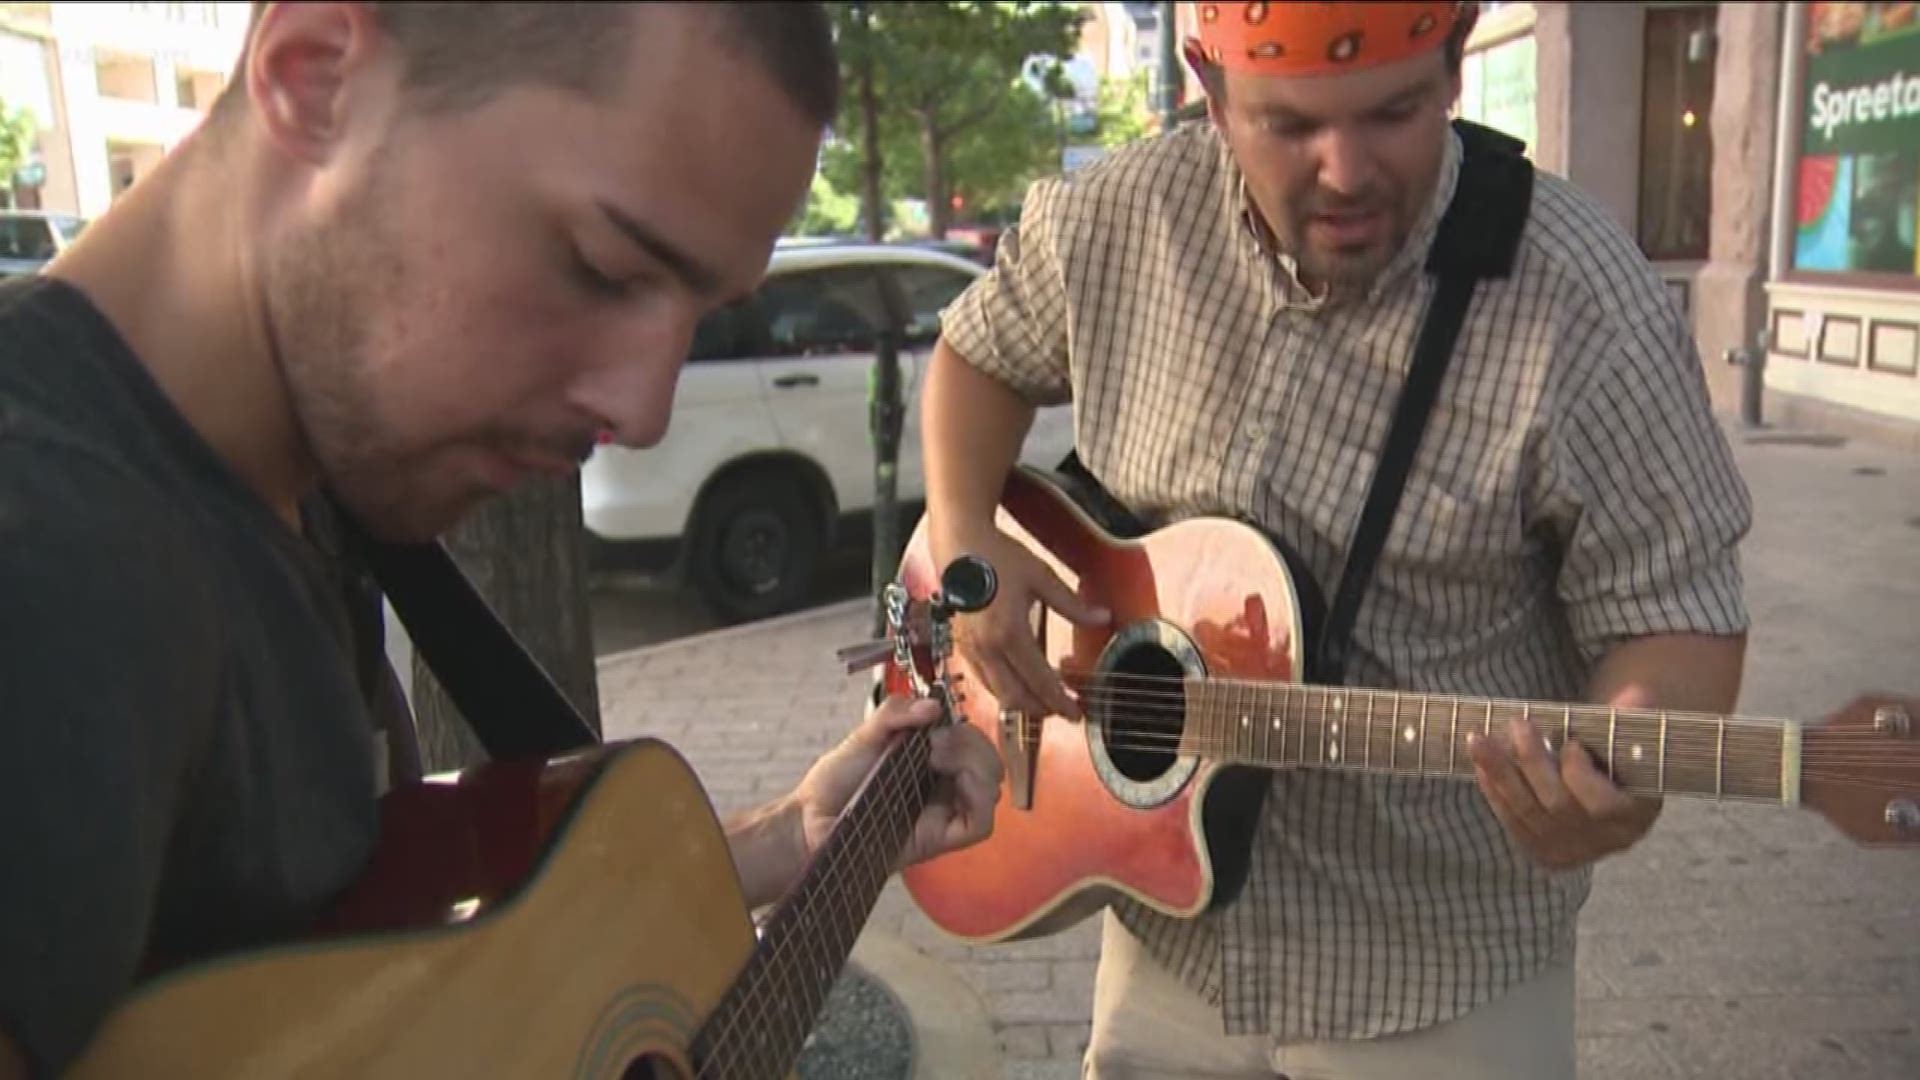 Buskers are benefiting from changes in the Live Music Capital of the World.